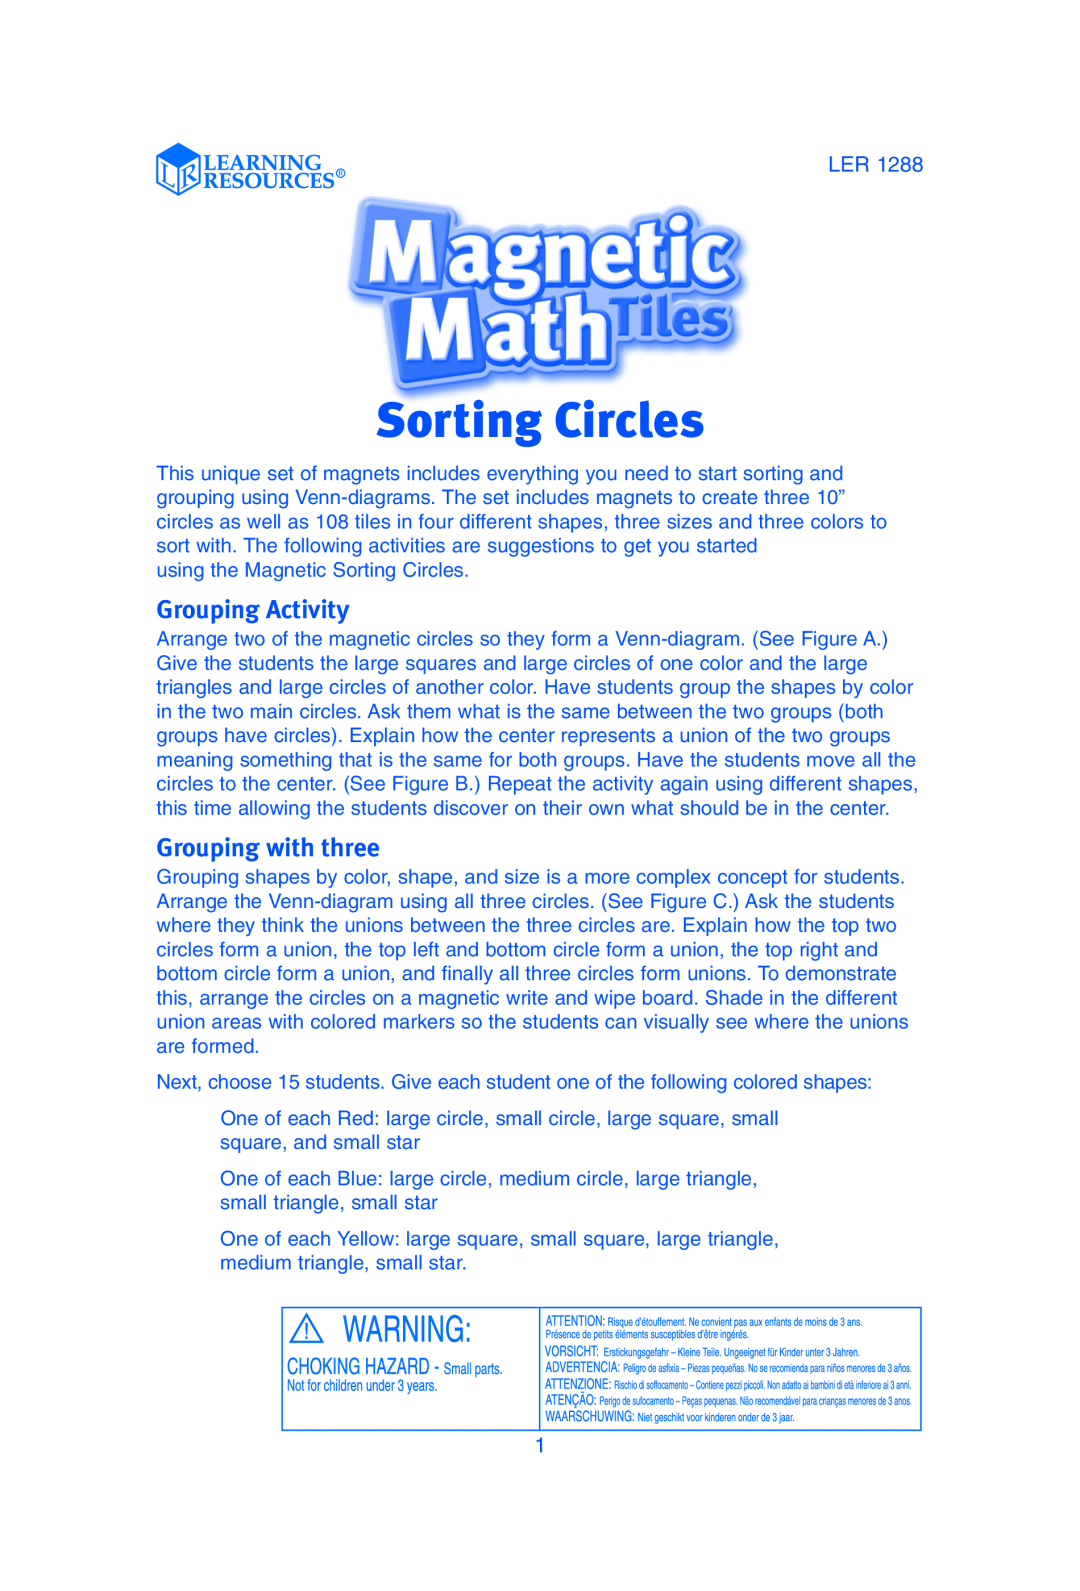 Learning Resources LER 1288 manual Grouping Activity, Grouping with three, Sorting Circles 